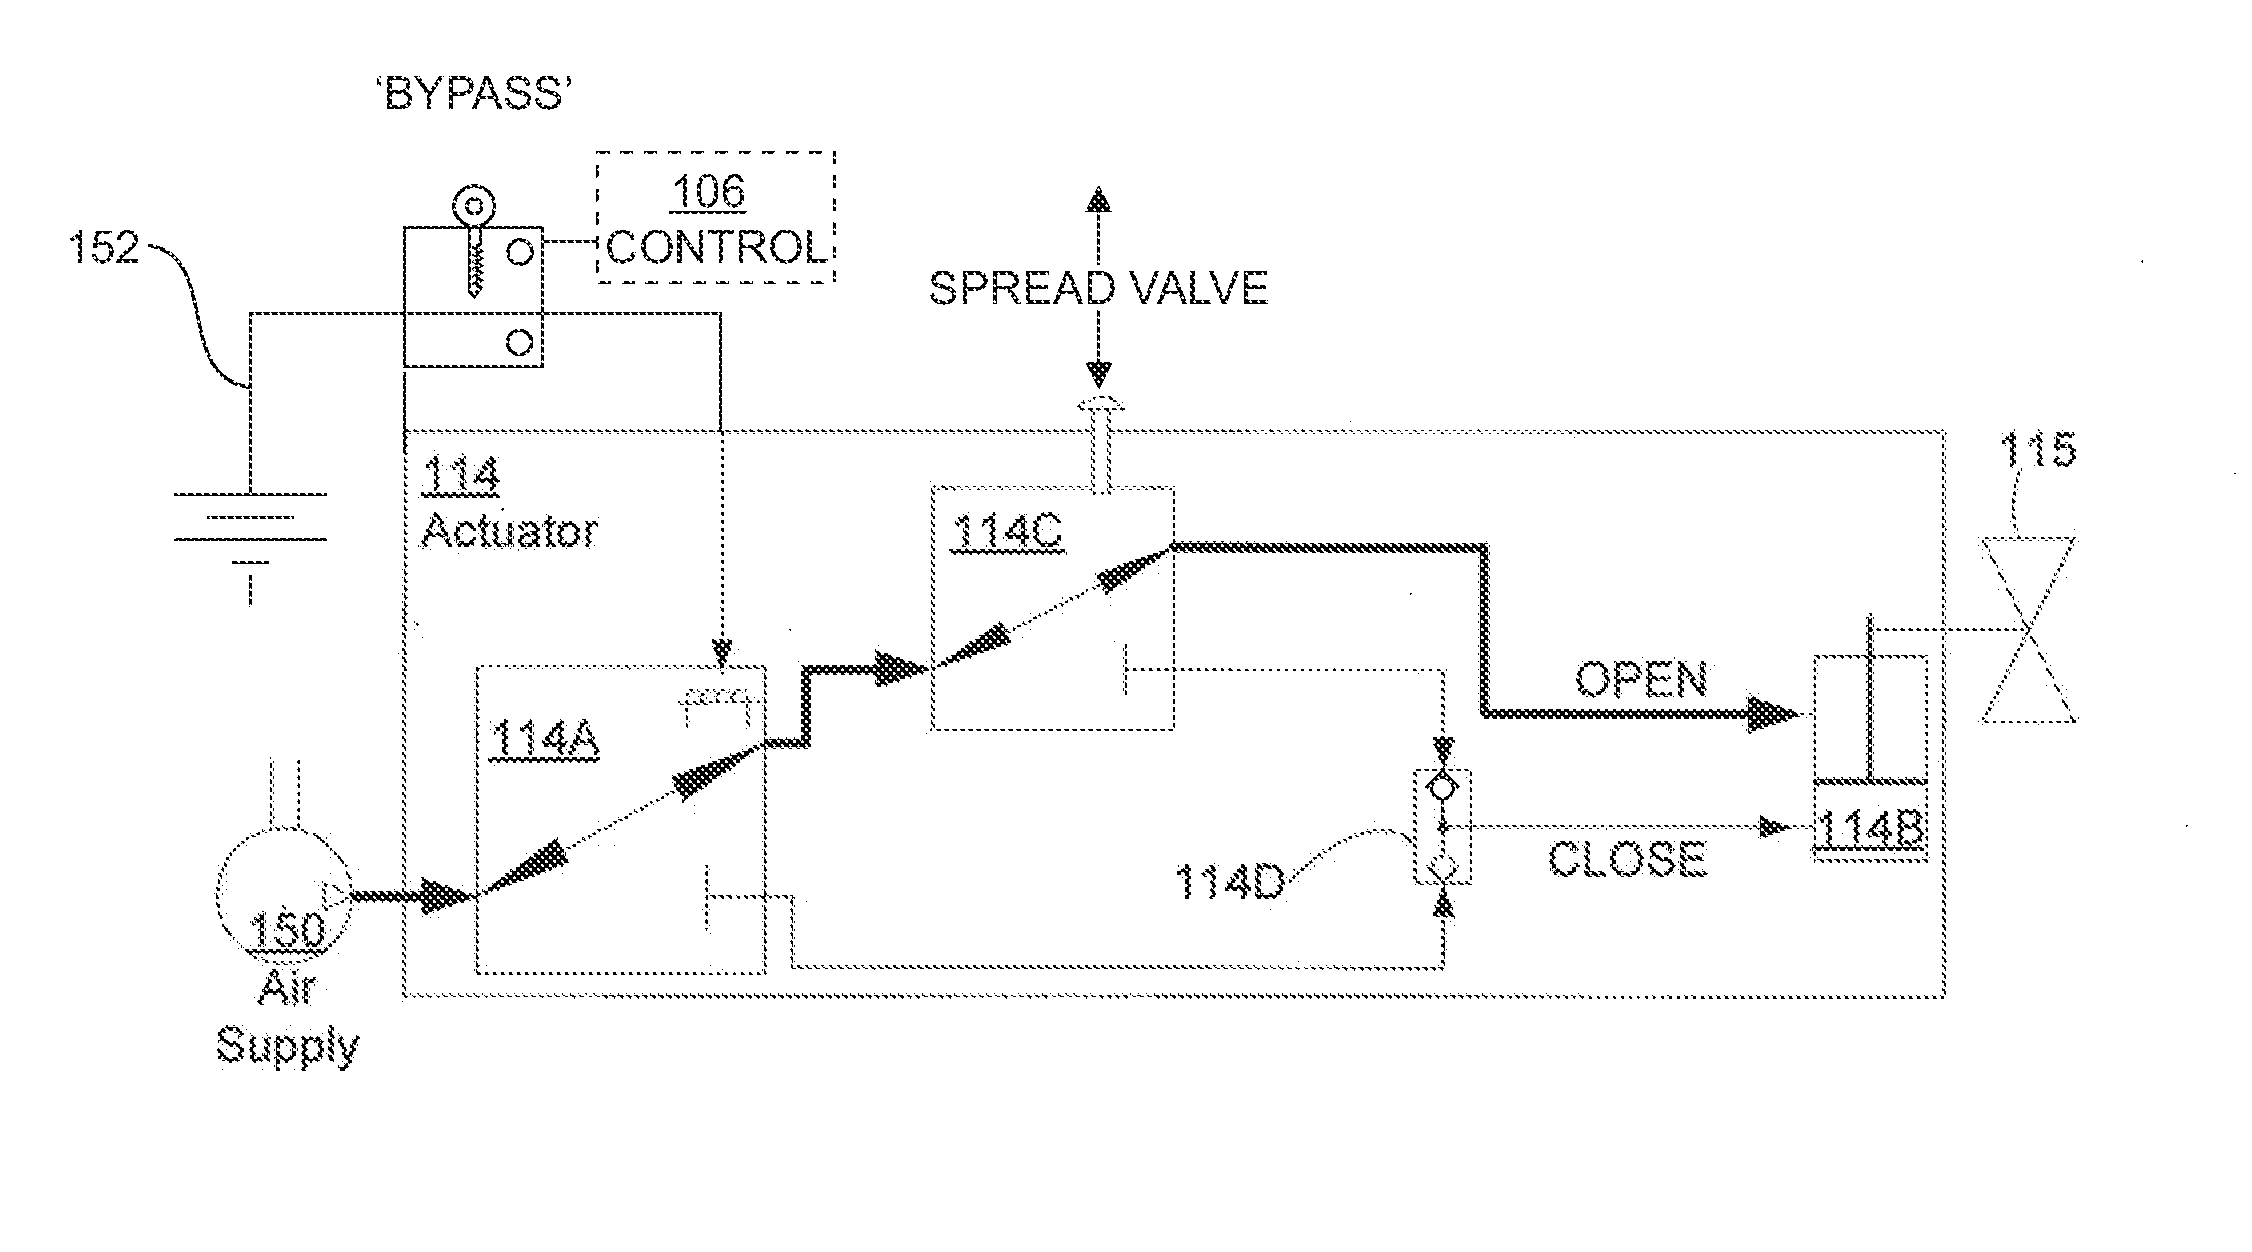 System and method for compliance management of fluids in and about drilling sites